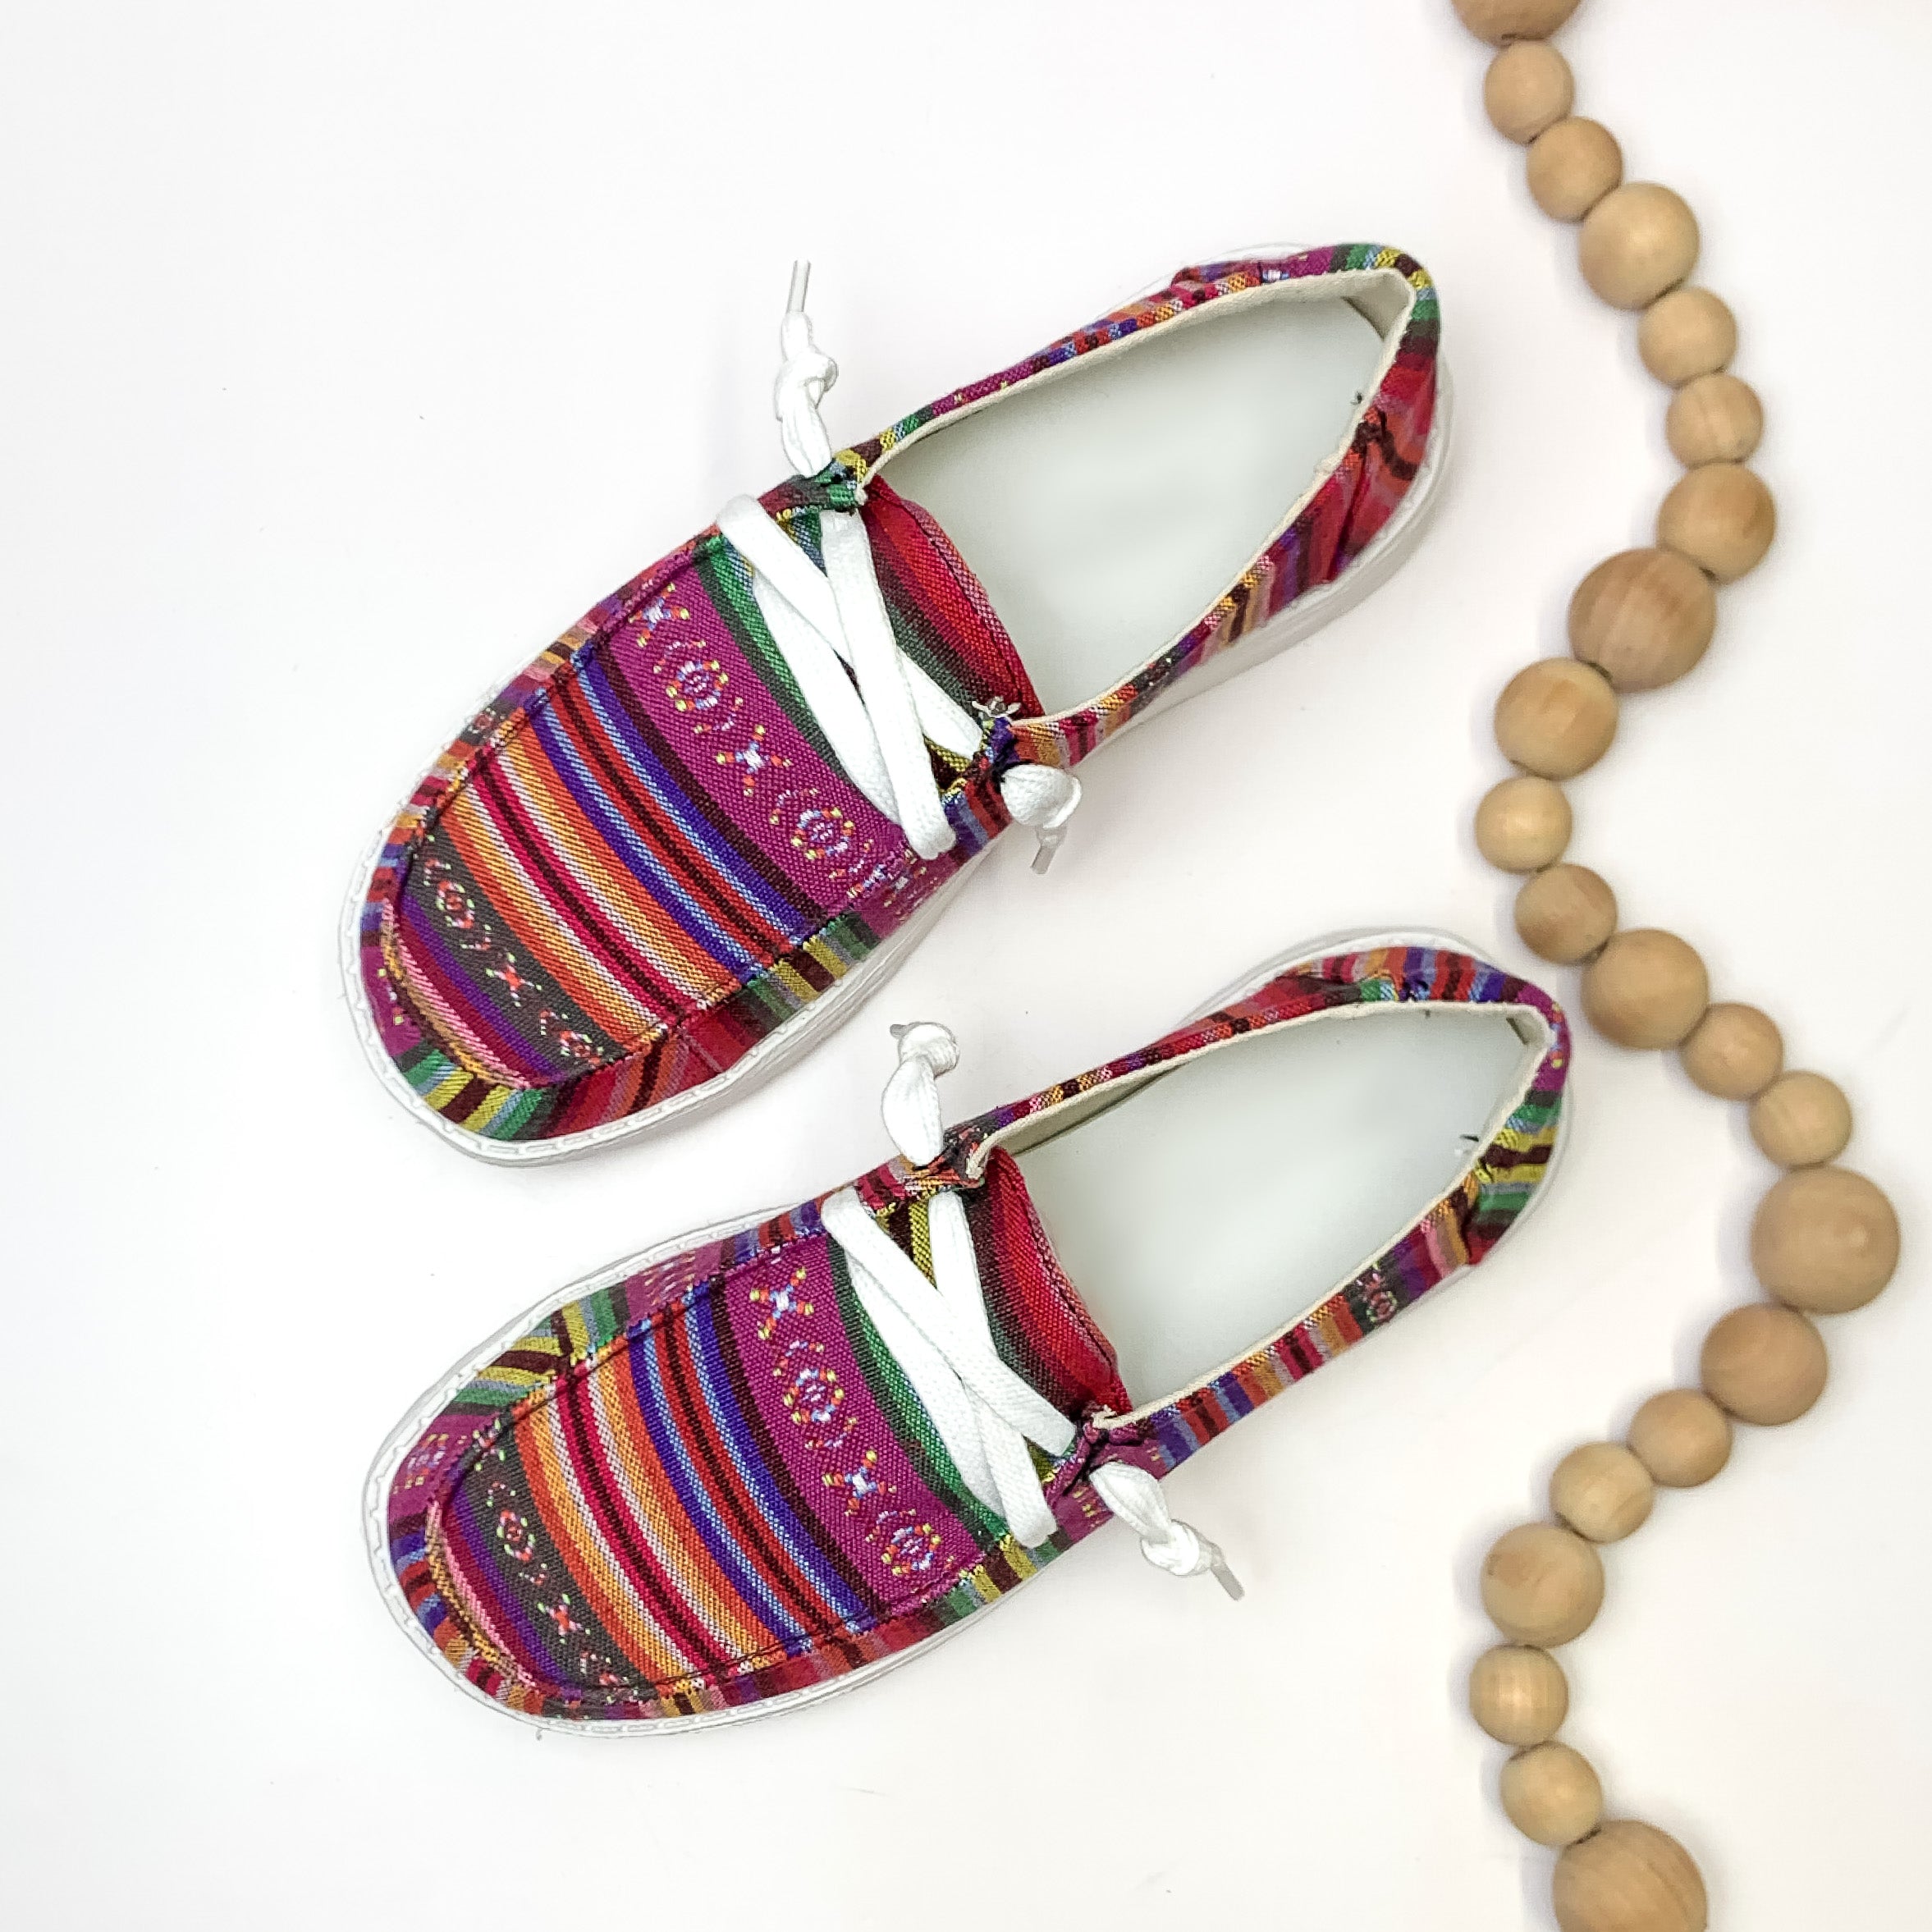 Very G | Have To Run Slip On Serape Print Loafers with Laces in Fuchsia Pink Multi